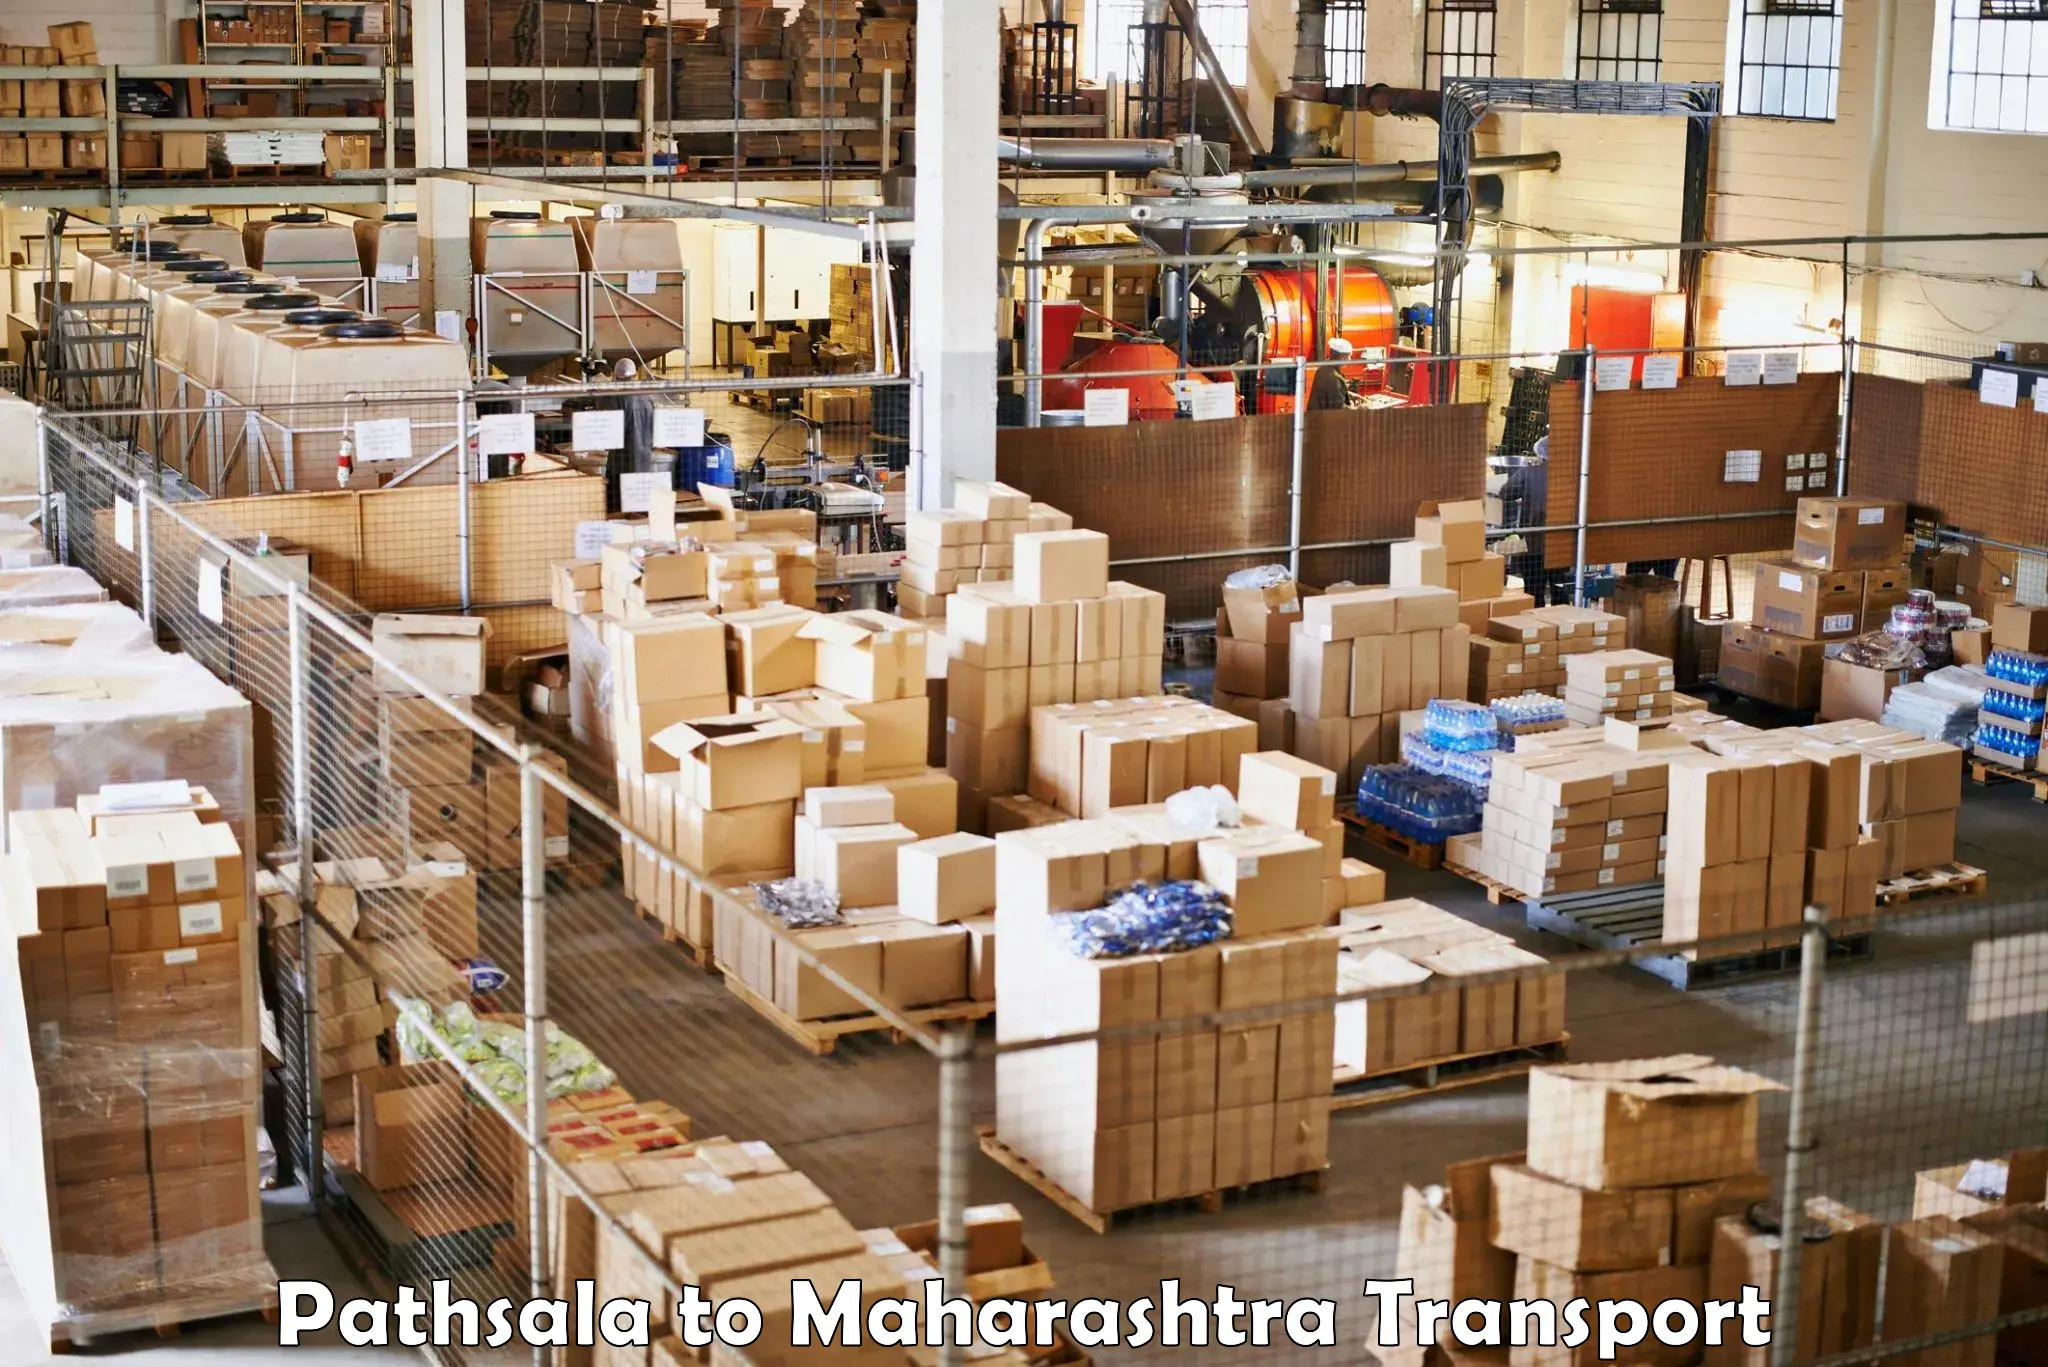 Truck transport companies in India Pathsala to Malegaon